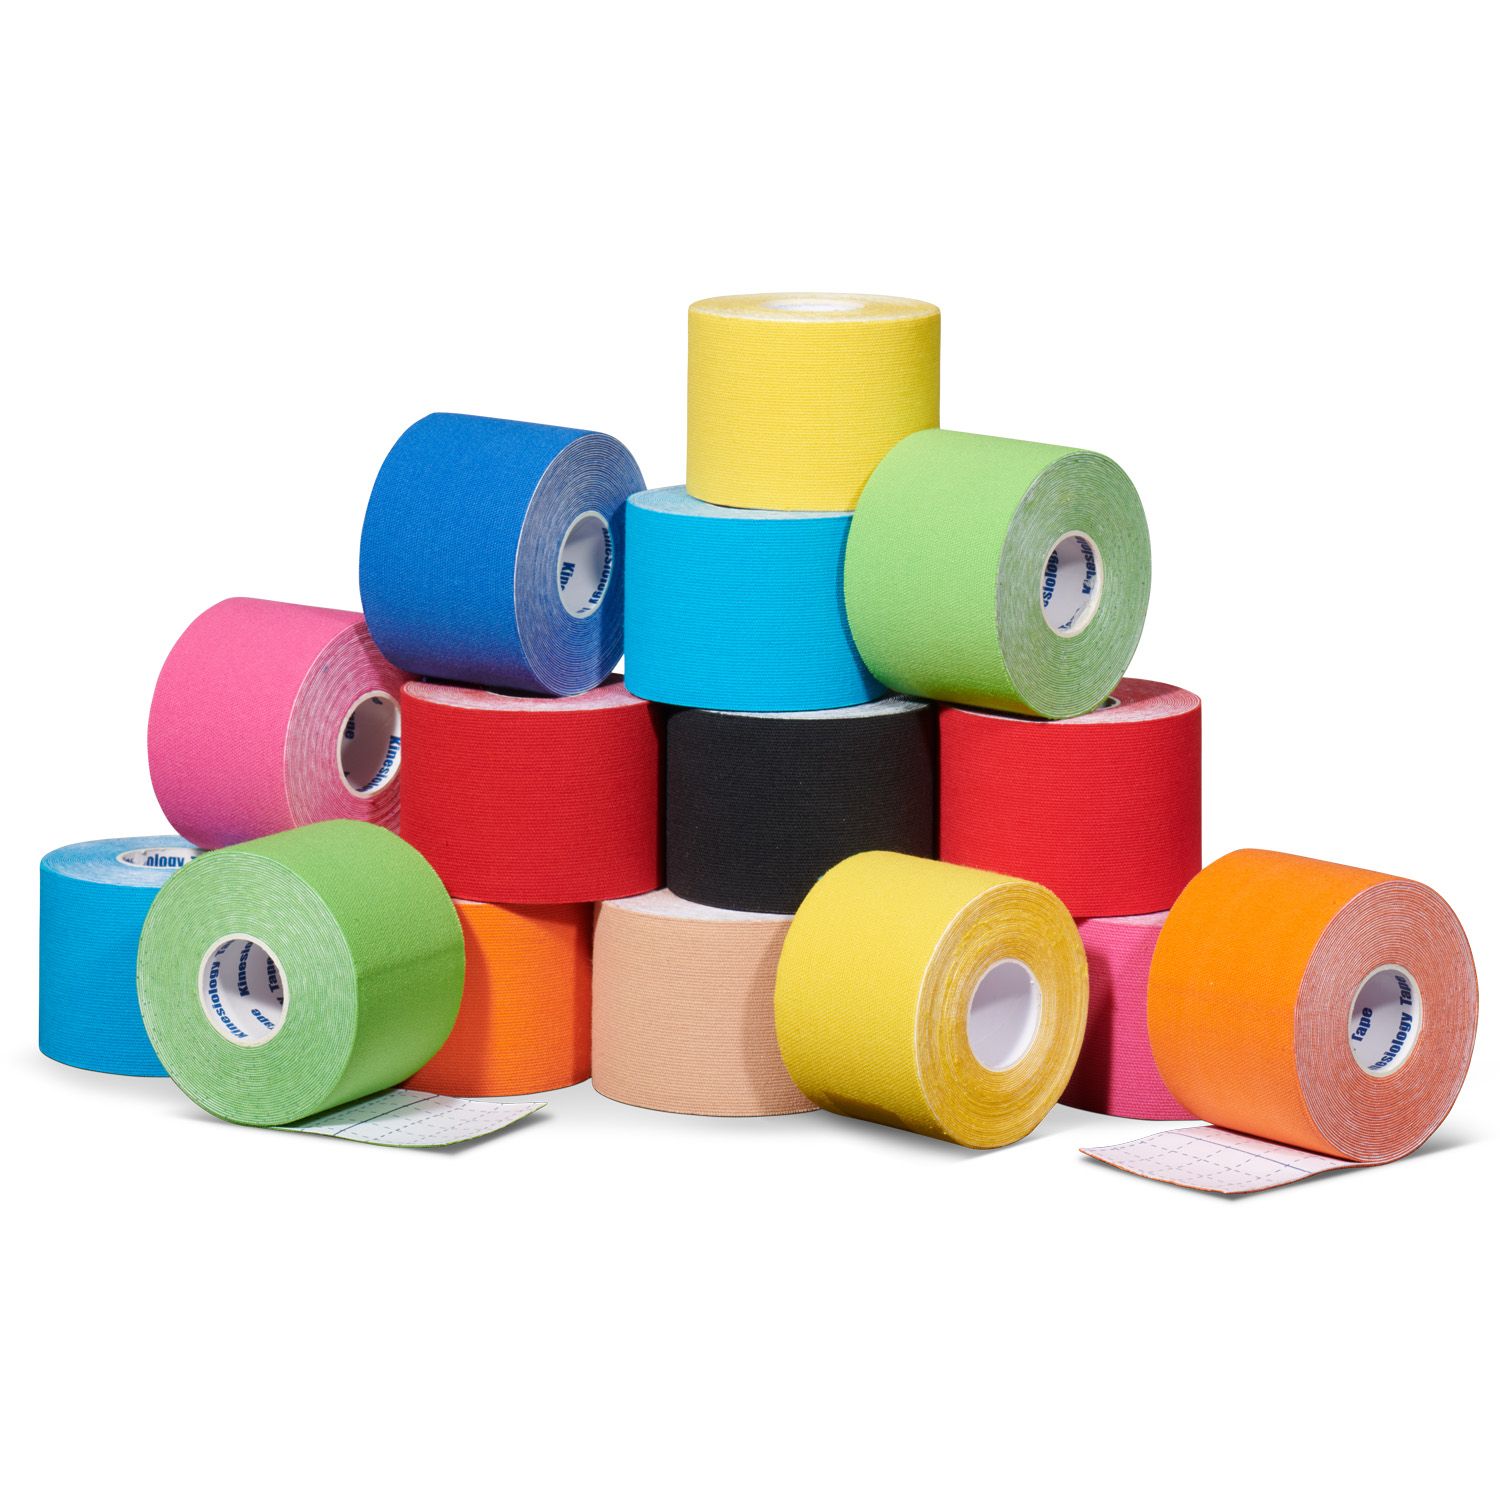 Kinesiology tape 12 rolls plus 3 rolls for free 